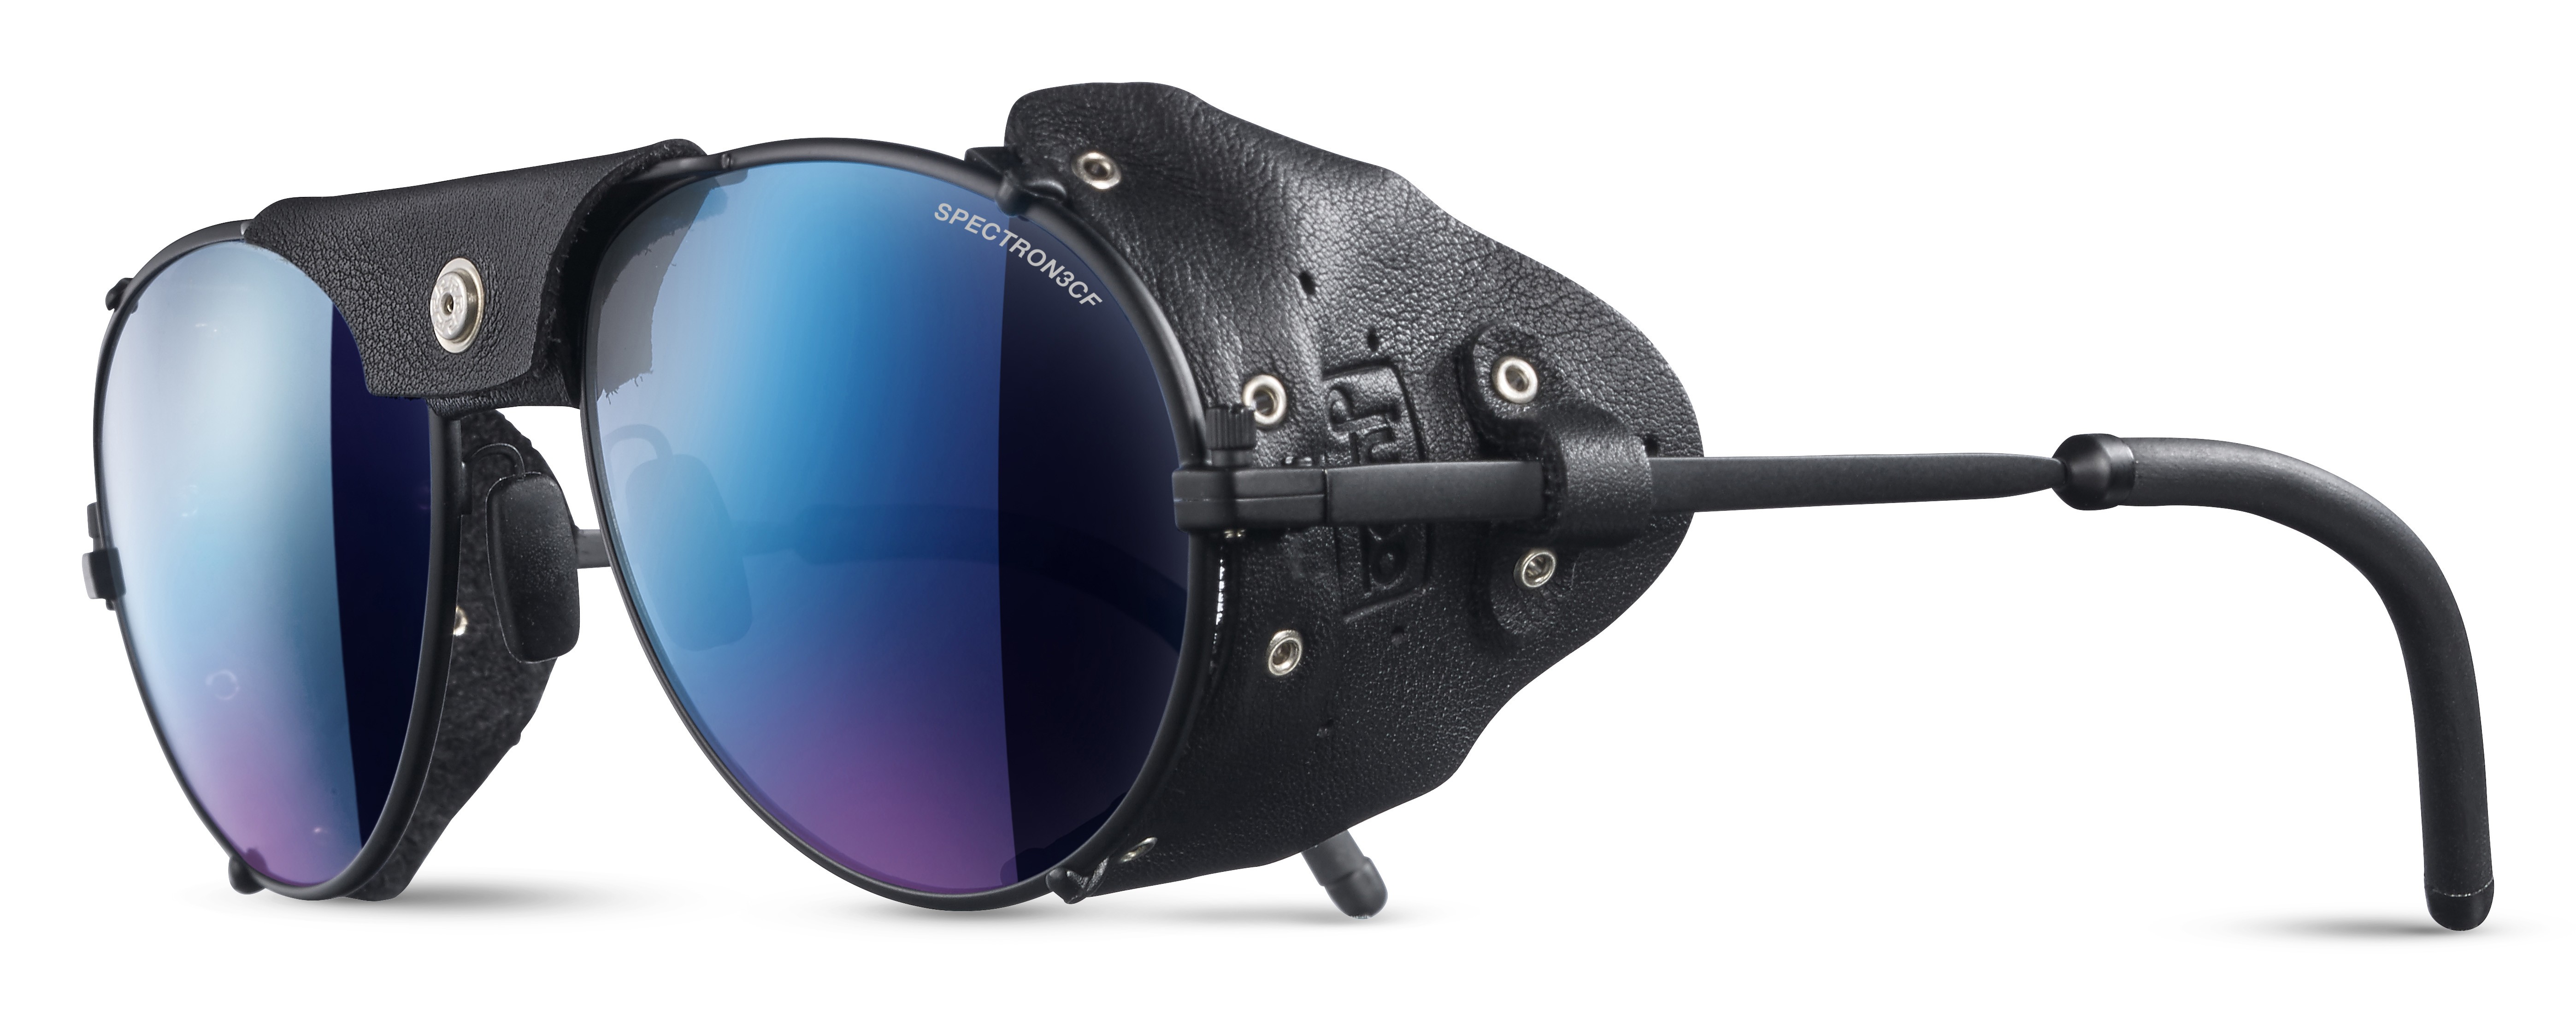 ray ban sunglasses with leather sides